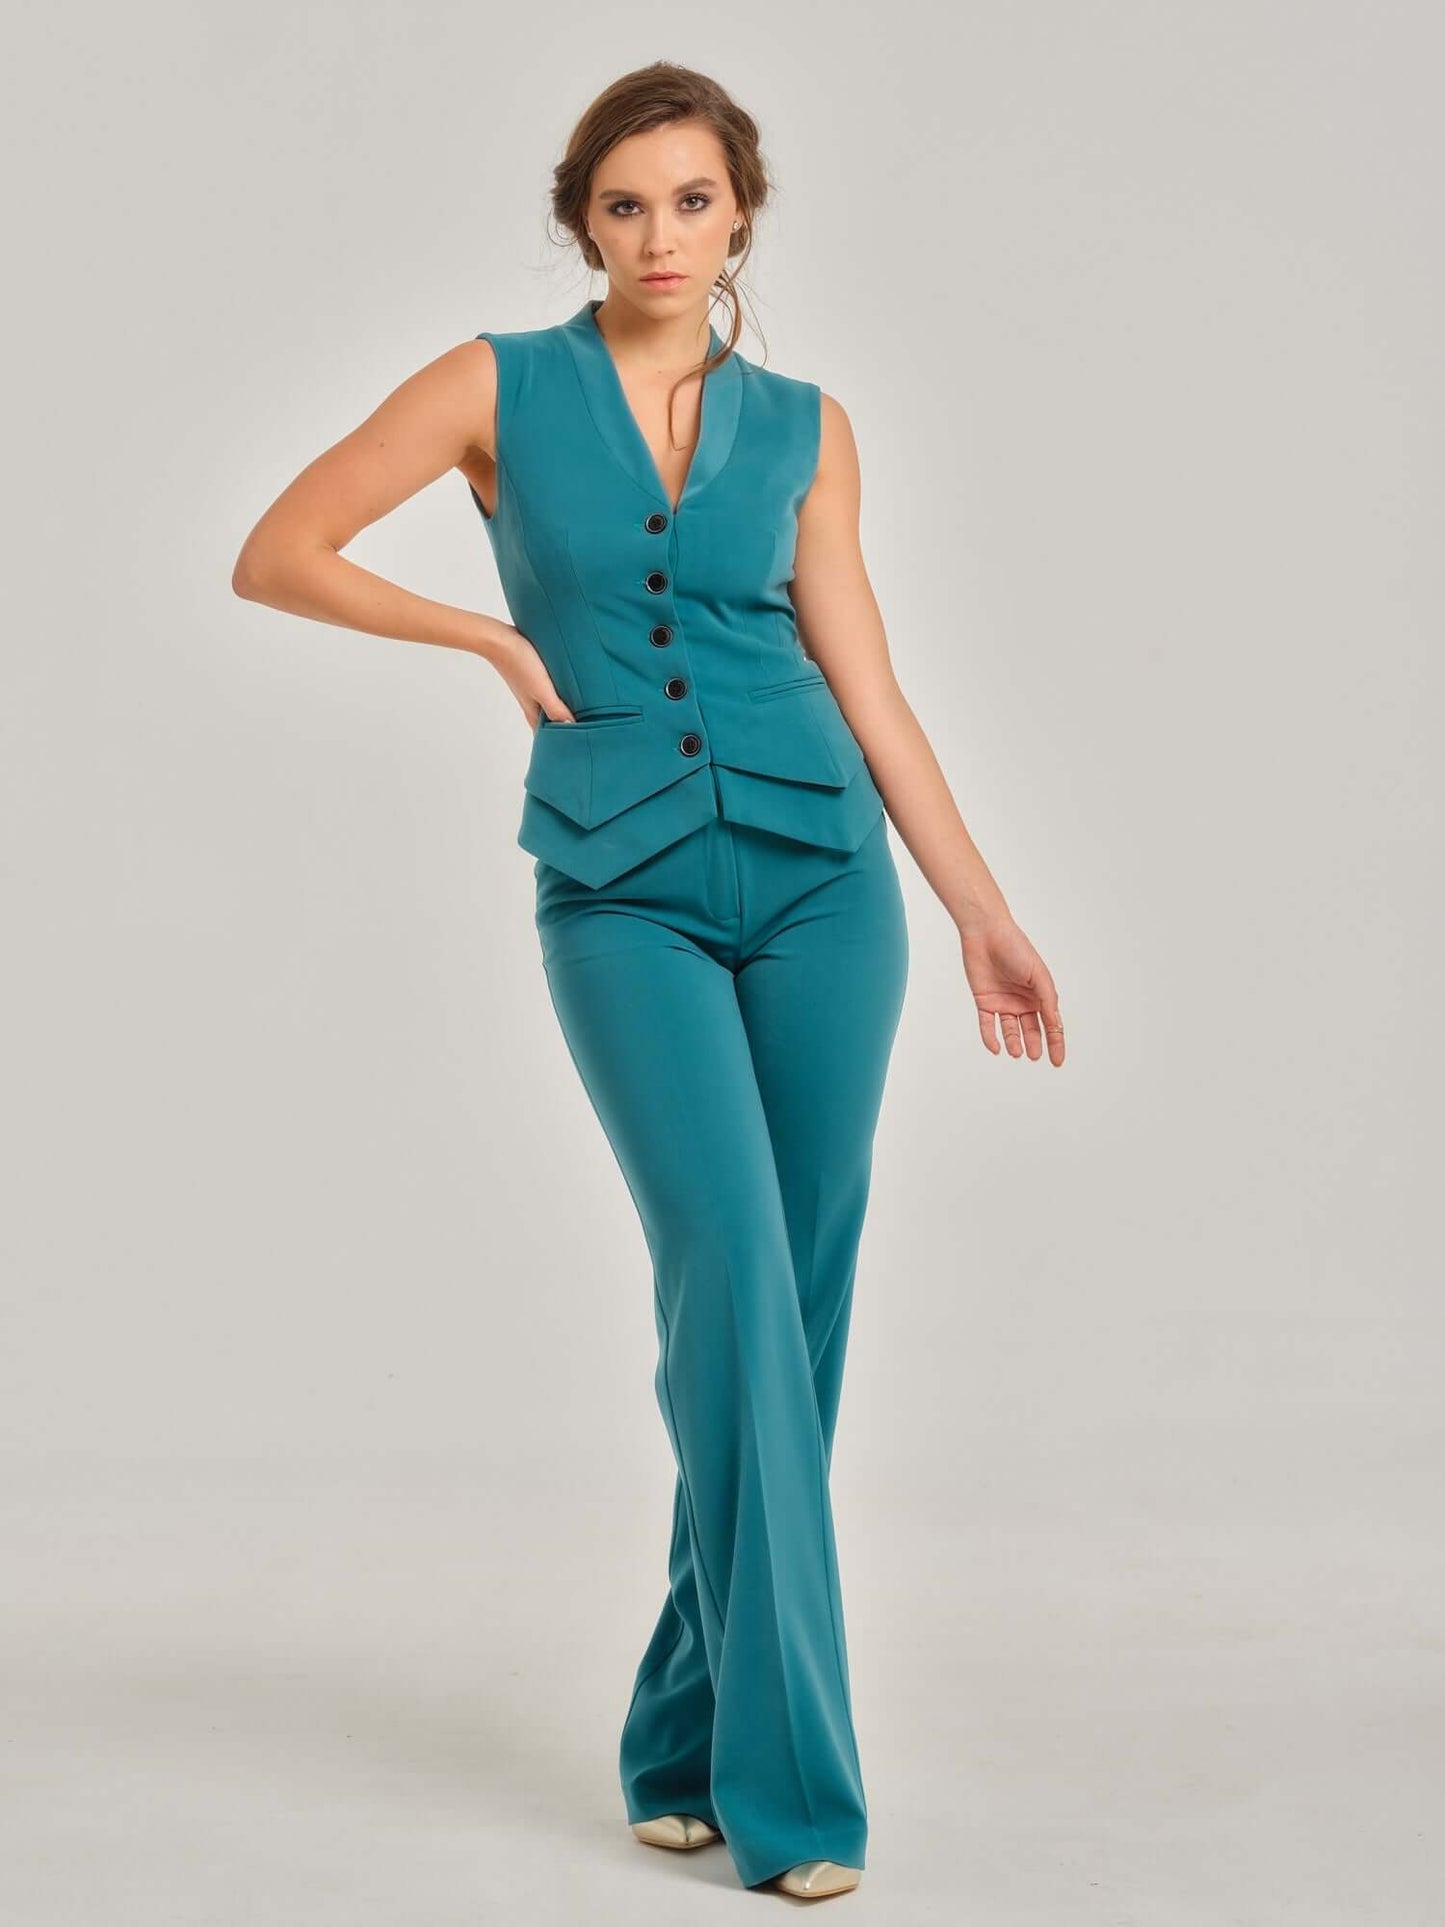 Tia Dorraine Magic Hour Fitted Single-Breasted Waistcoat The Magic Hour V-neckline vest is a classic piece that adds a twist with its sharp details - its double-layered sharply shaped bottom and its beautiful statement buttons. It is comfortable and easy